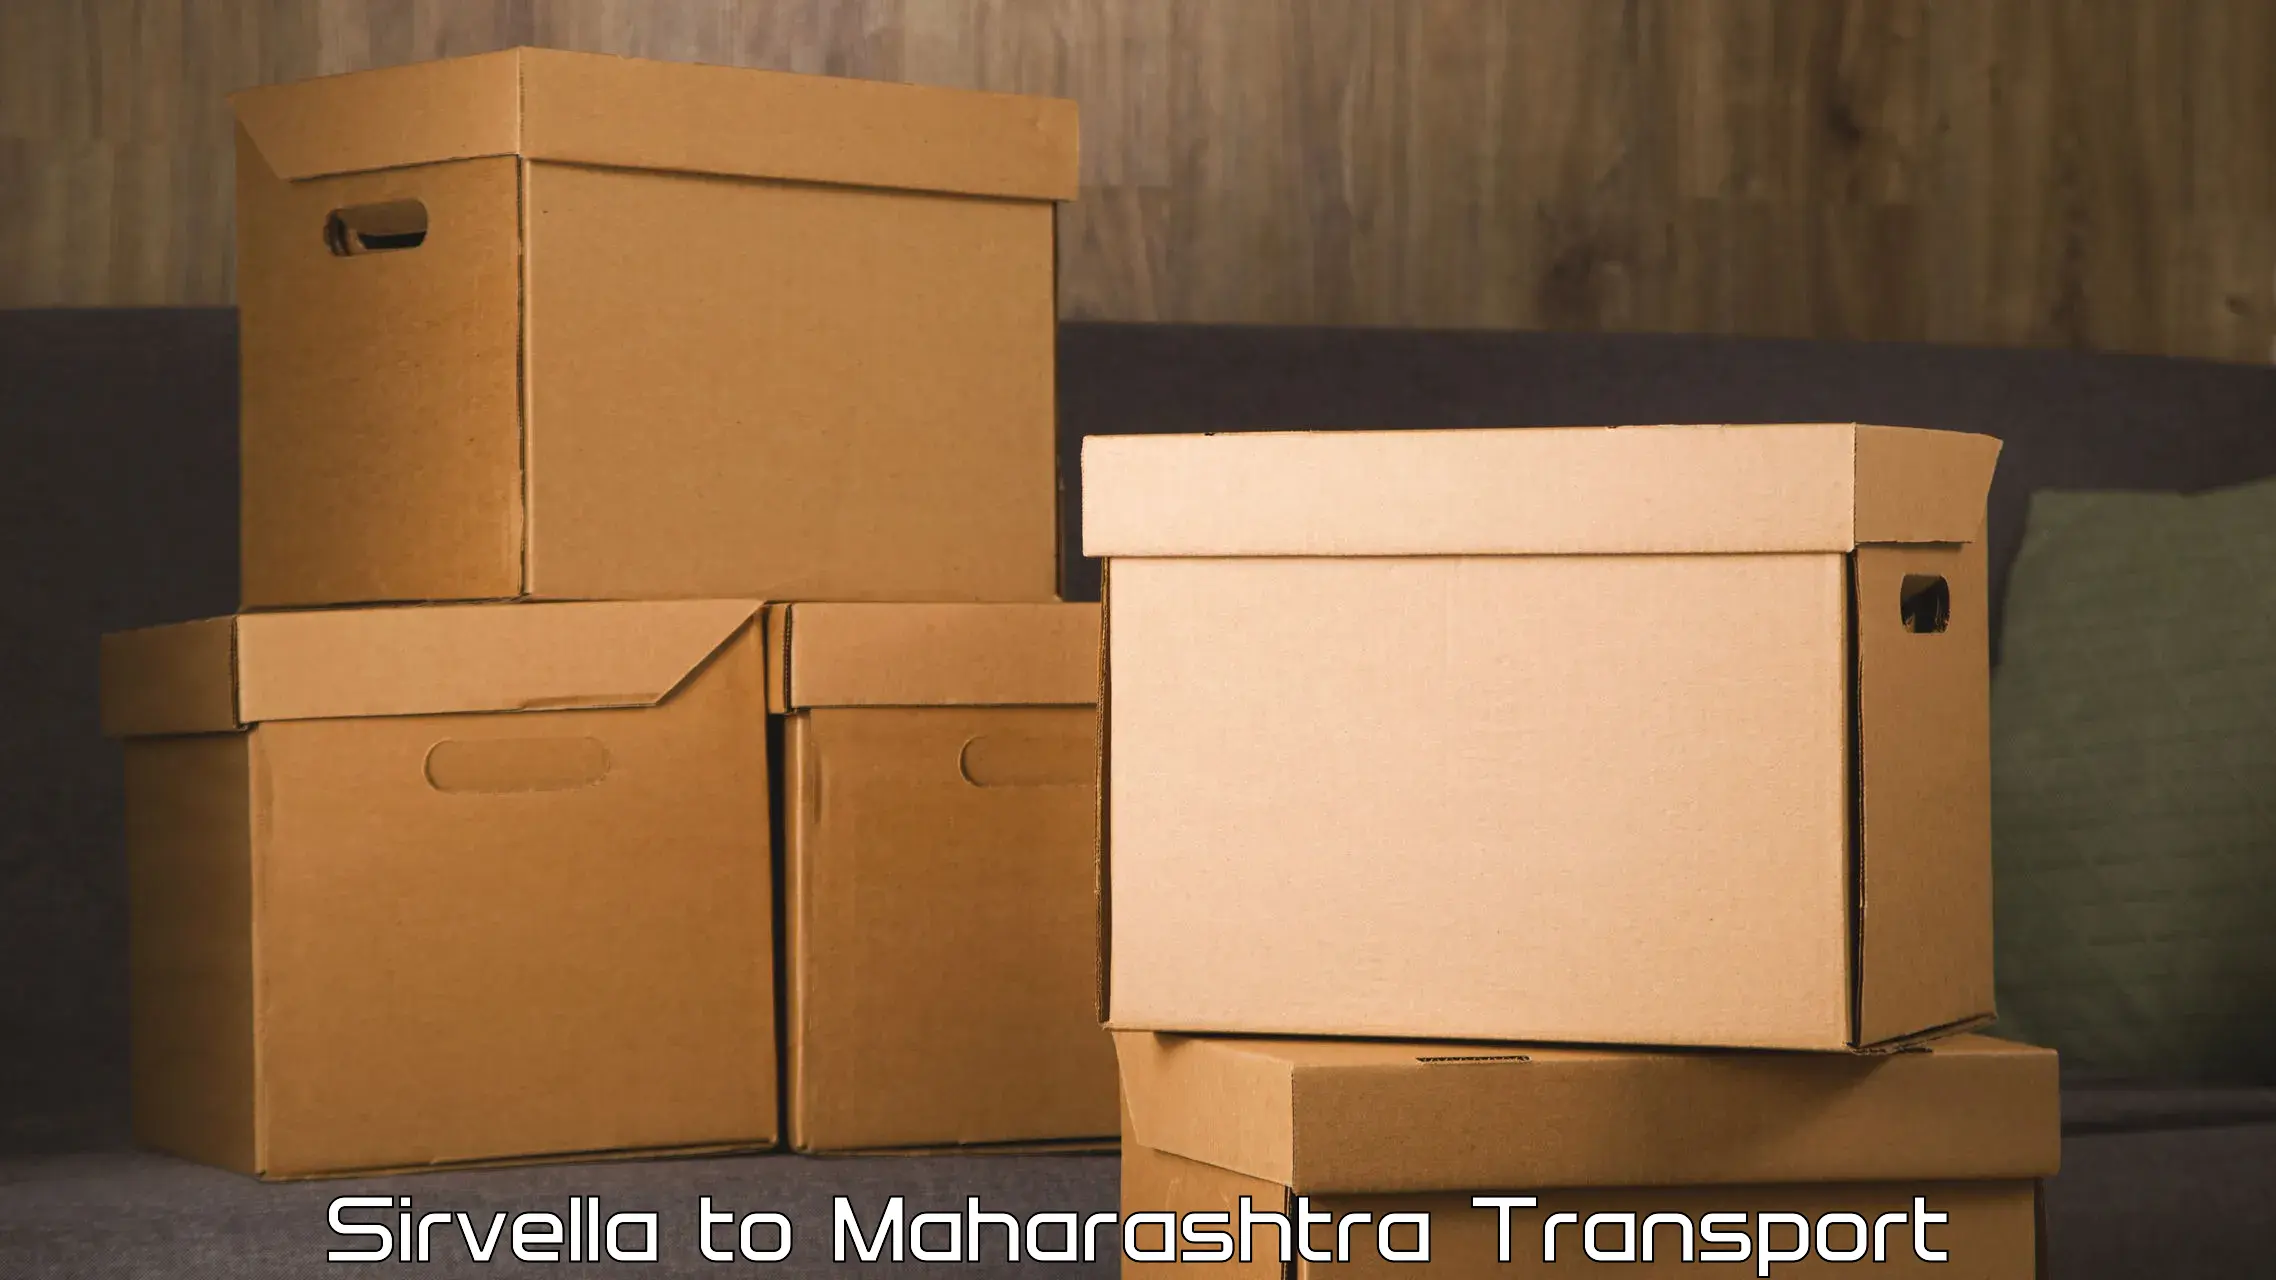 Commercial transport service Sirvella to Mandrup